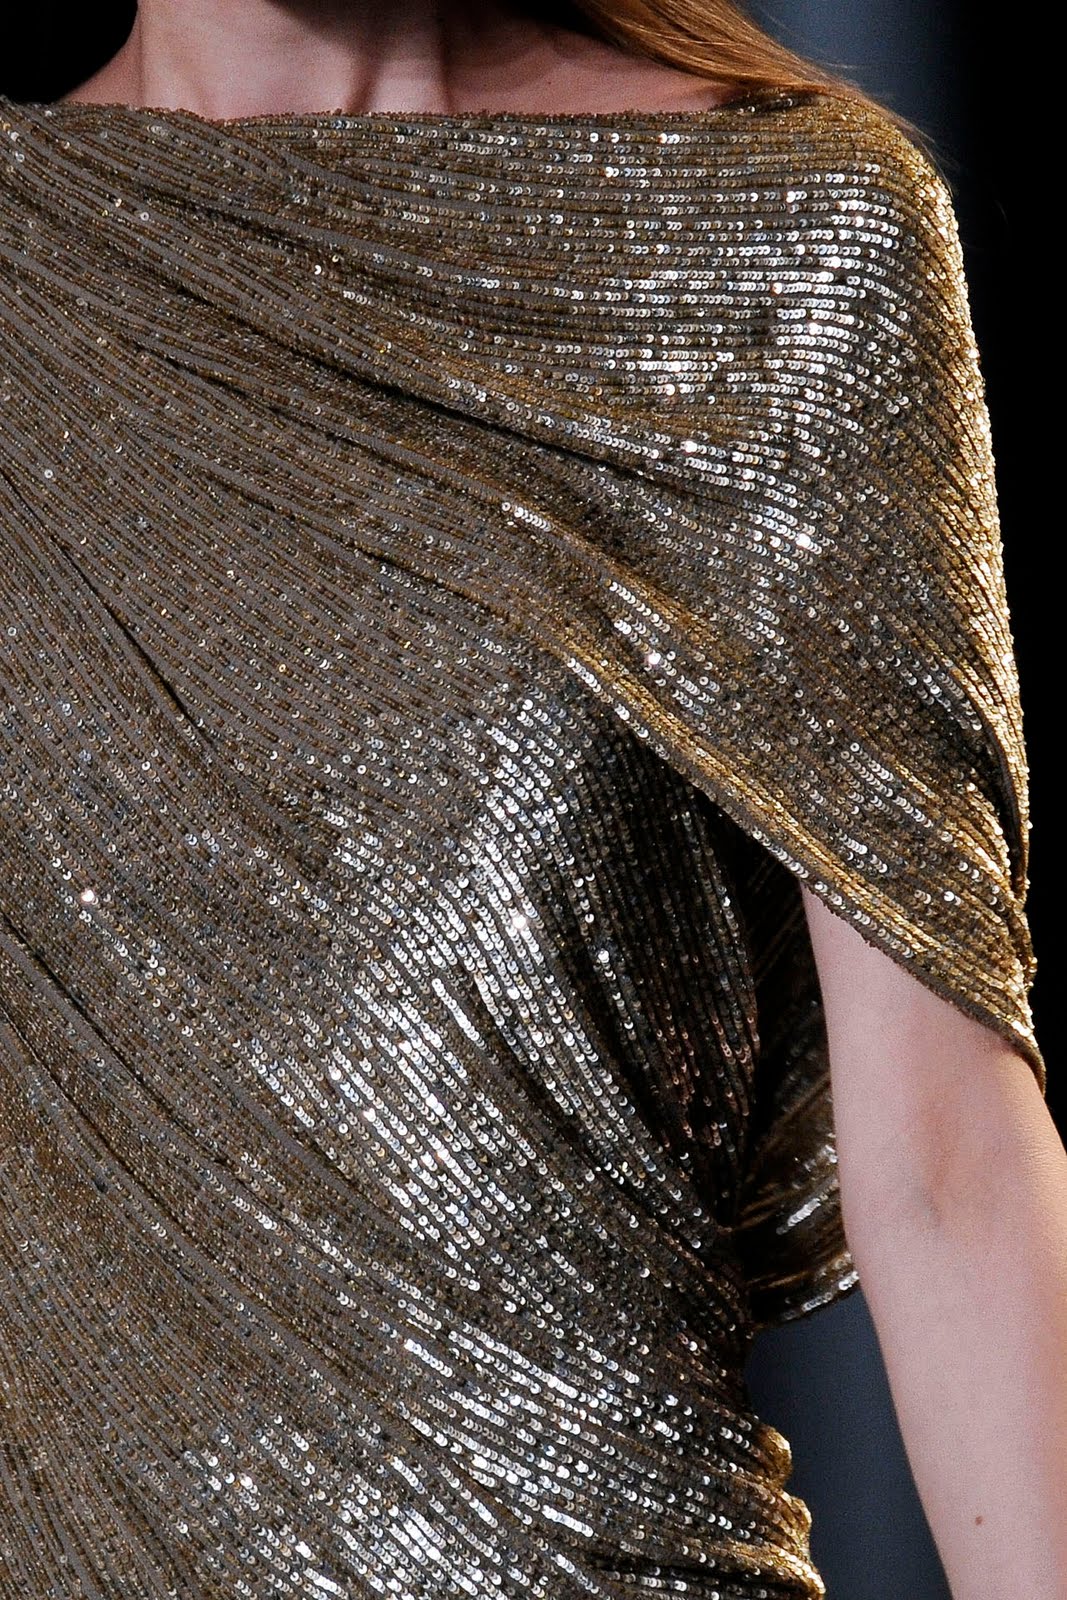 CHARMING: DETAILS for Elie Saab [Fall 2010 Couture]